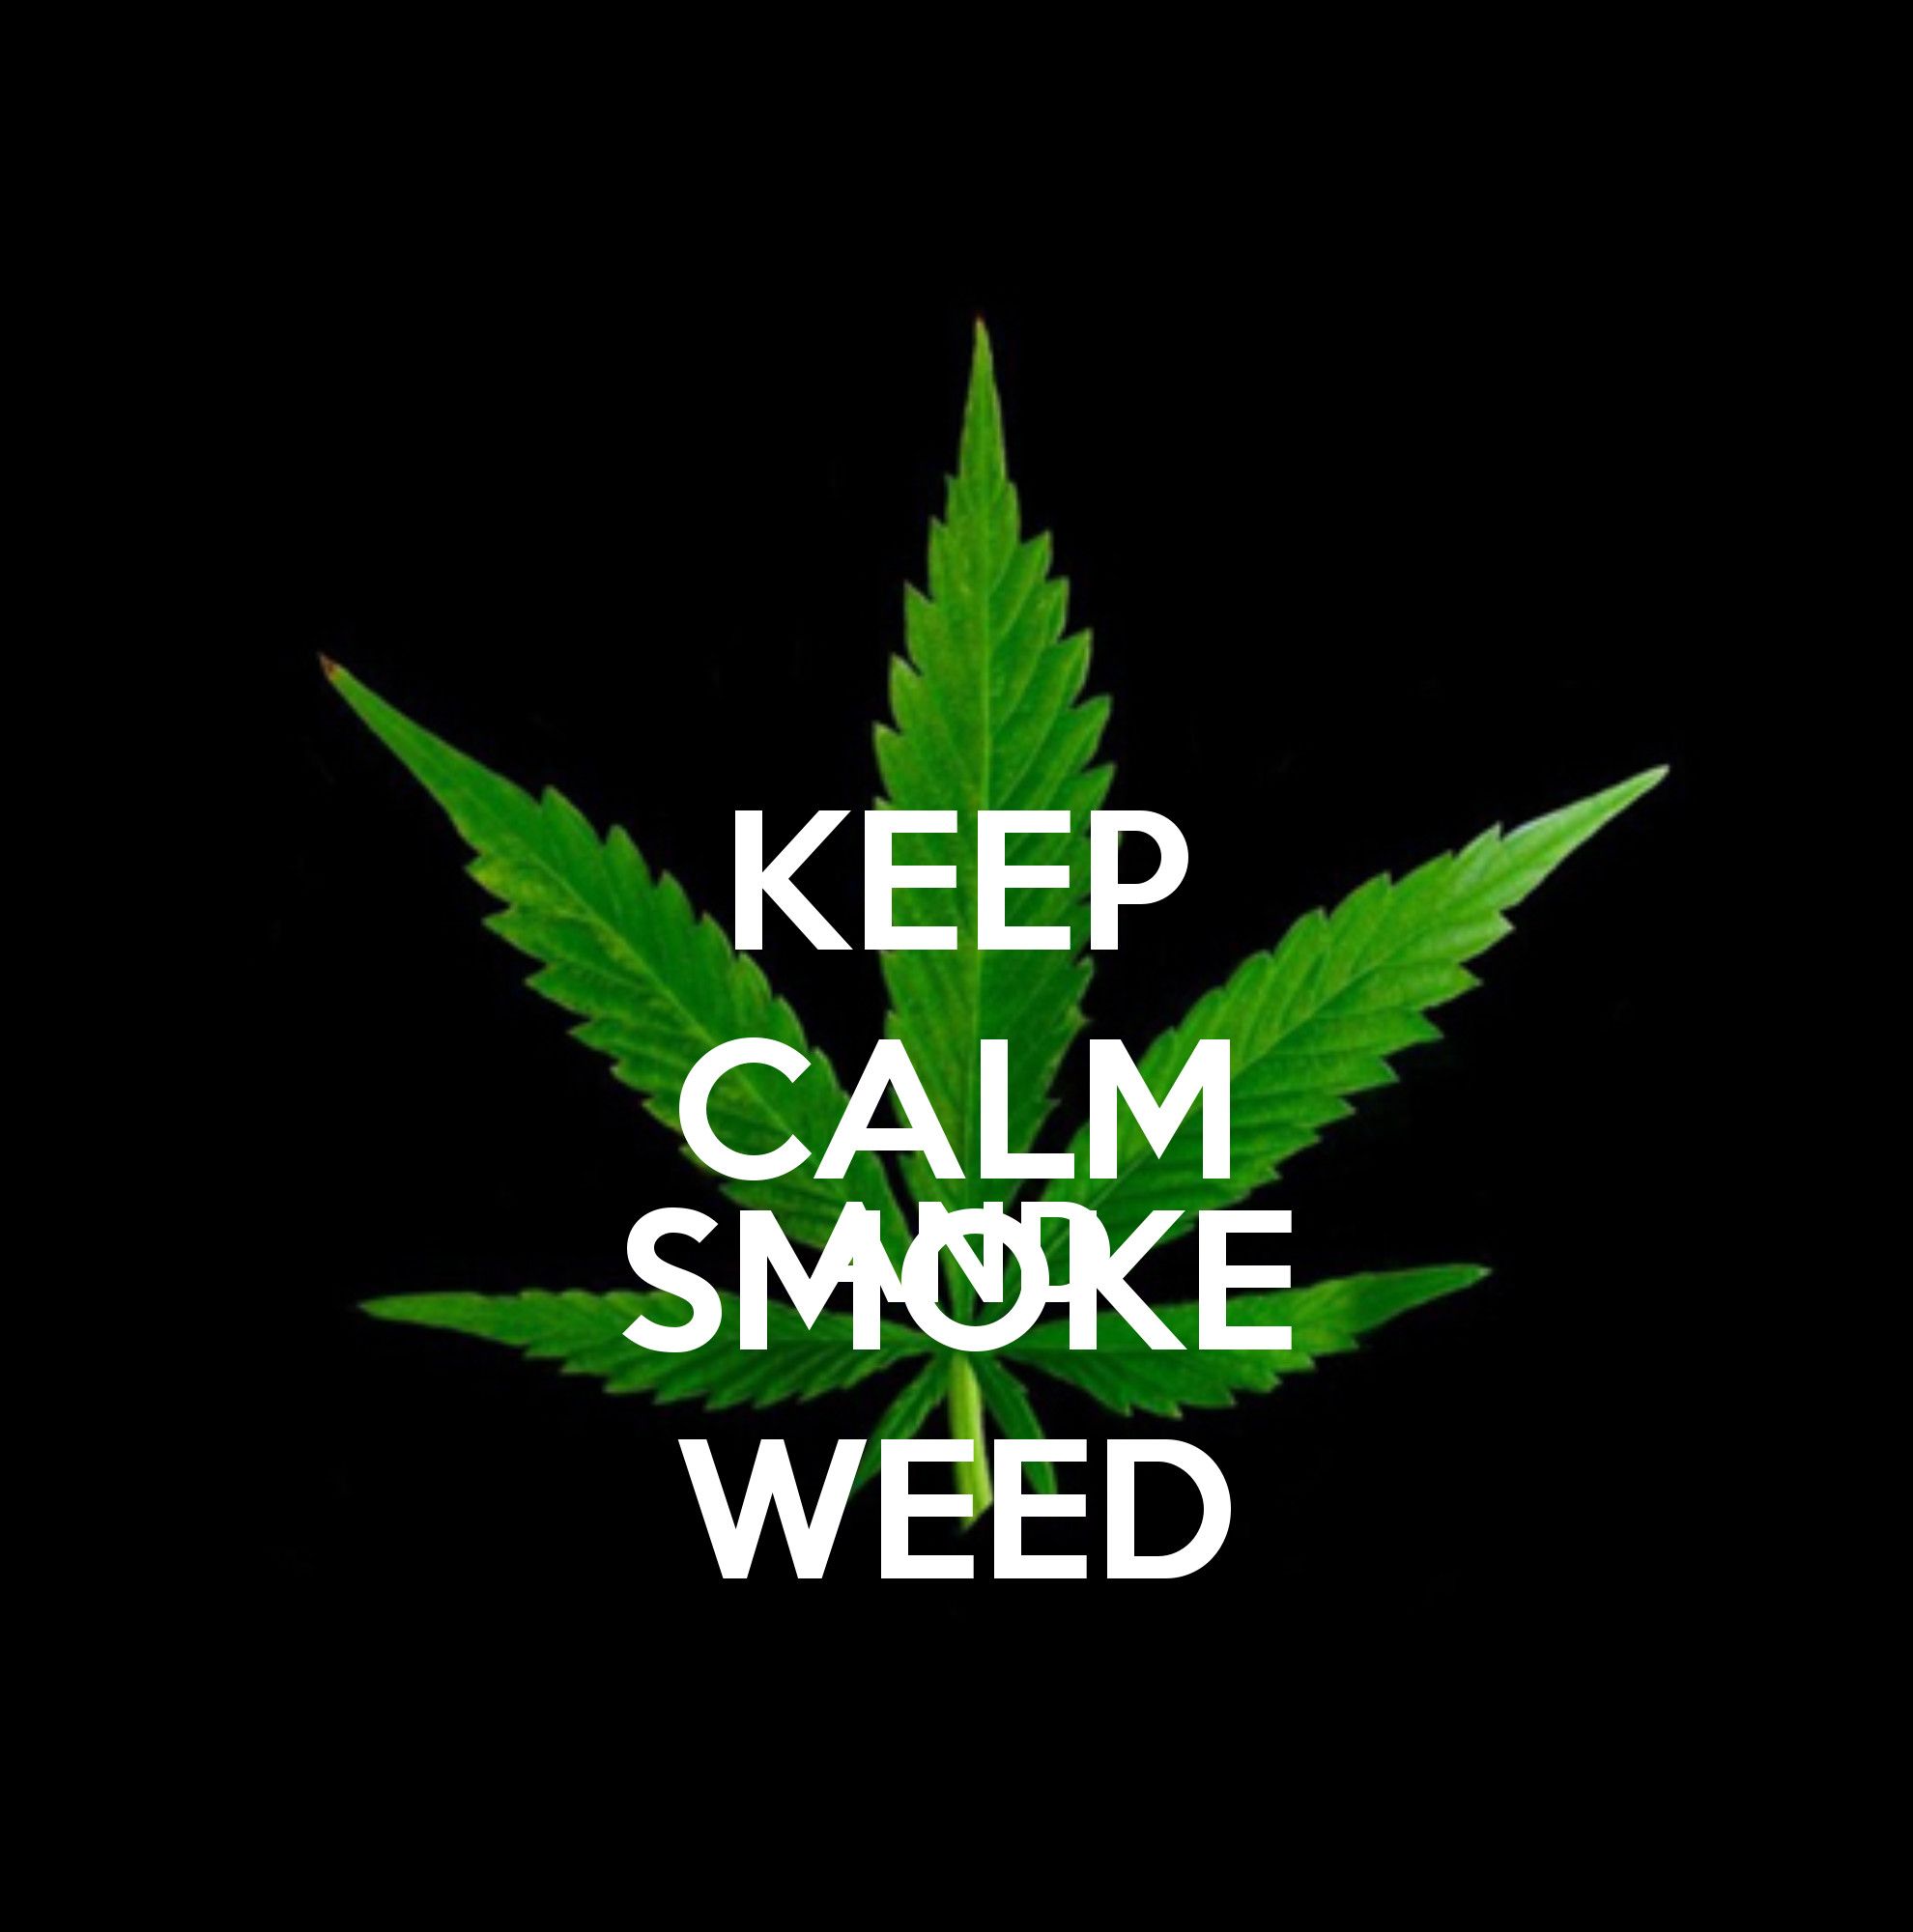 420 wallpaper by Xwalls  Download on ZEDGE  4a4f